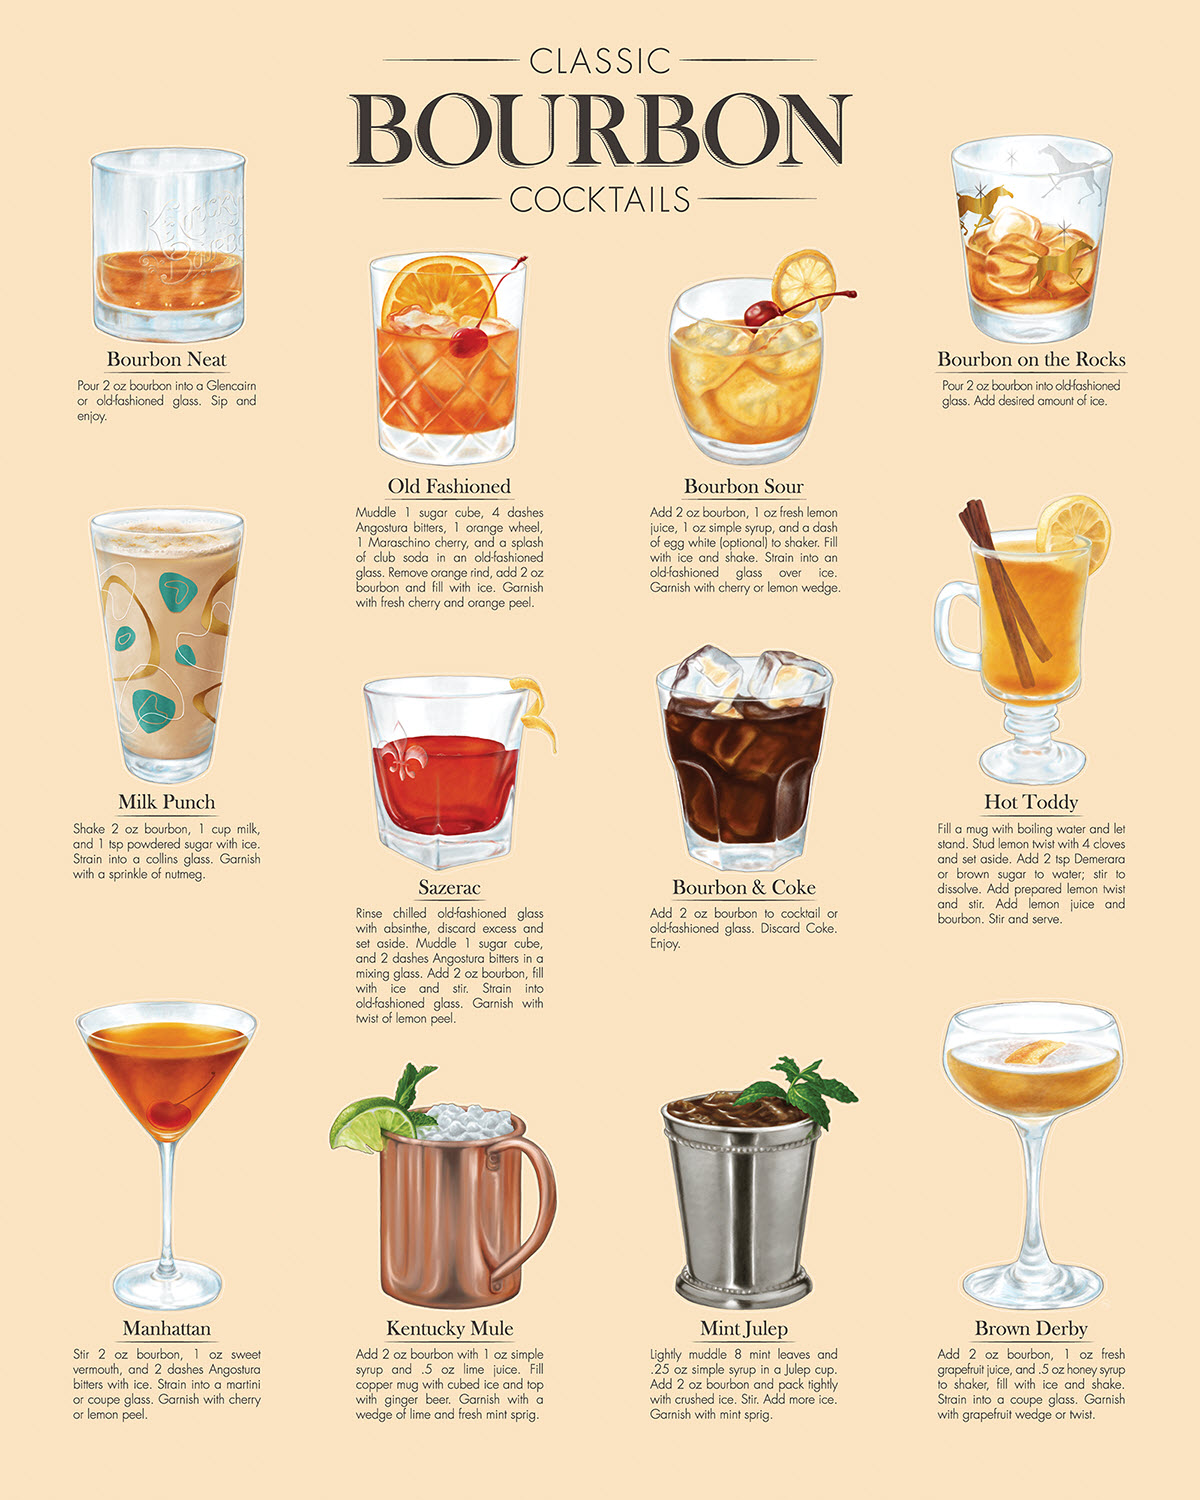 What Are the Best Drinks to Mix with Bourbon?